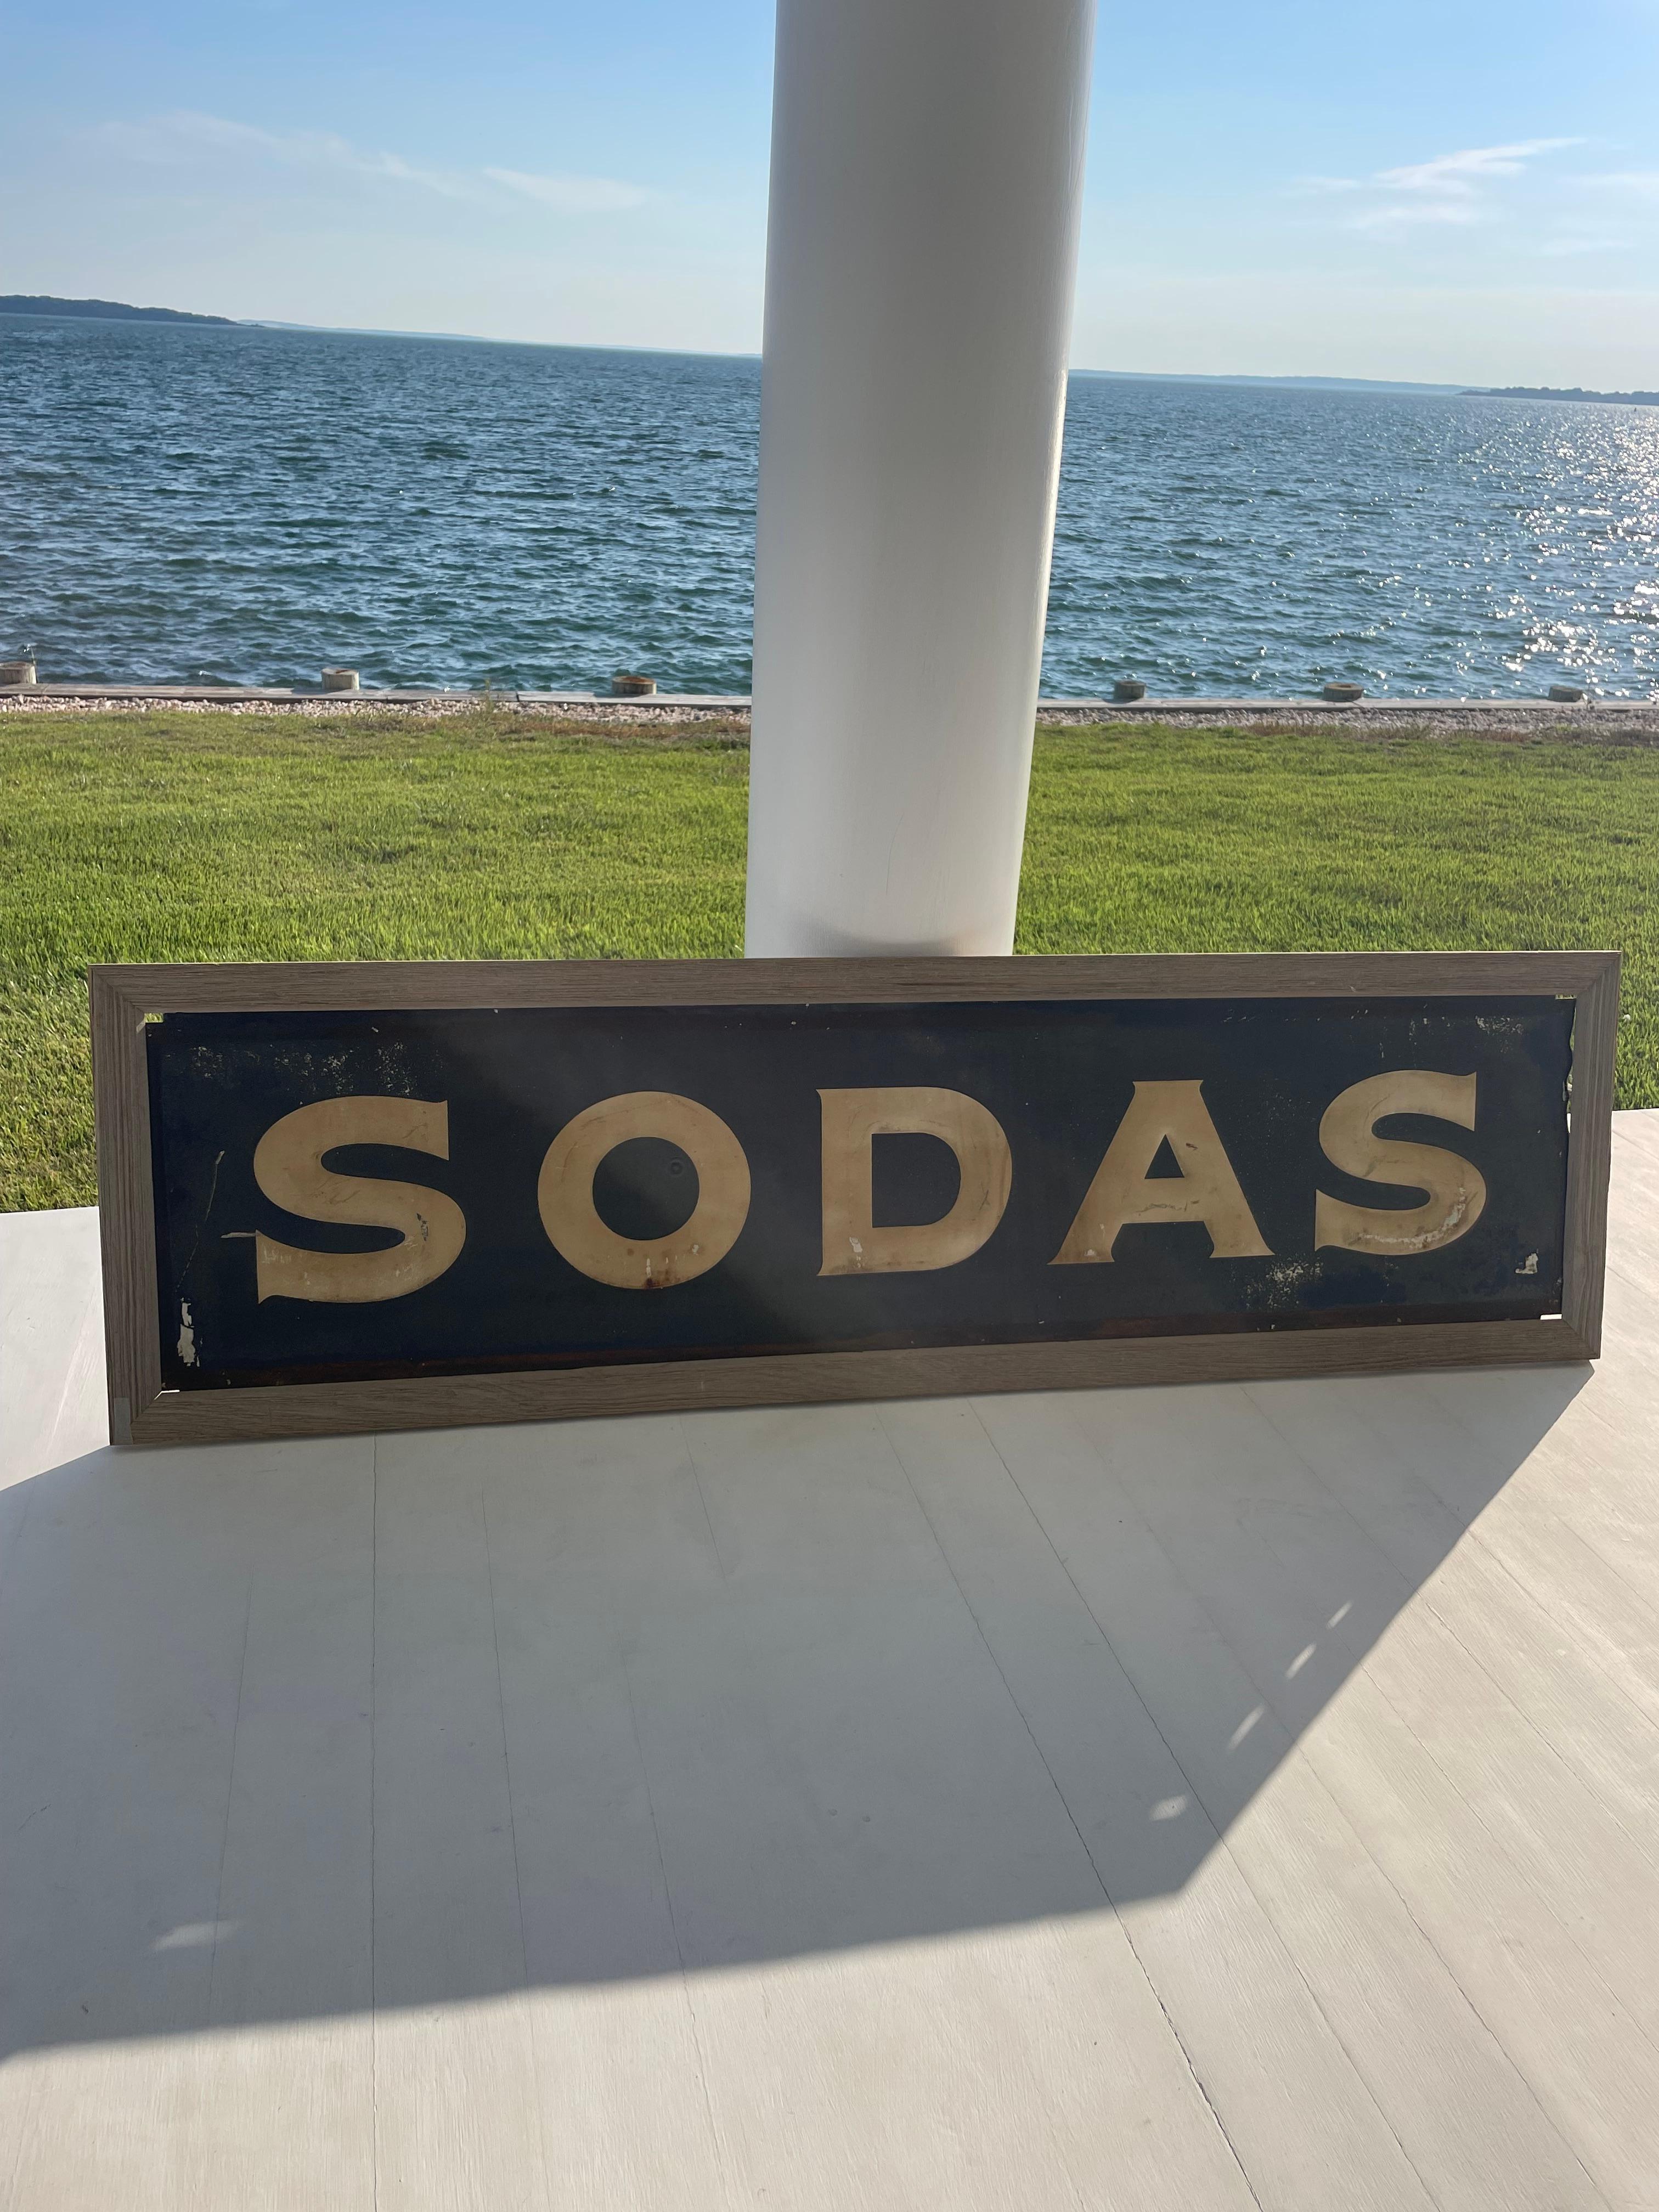 Great looking rare original large size embossed metal advertising “SODAS” sign..Looks like it came from an old country mom and pop store . All metal with a wooden frame and ready to hang easily . Perfect to add some charm to your home or business.